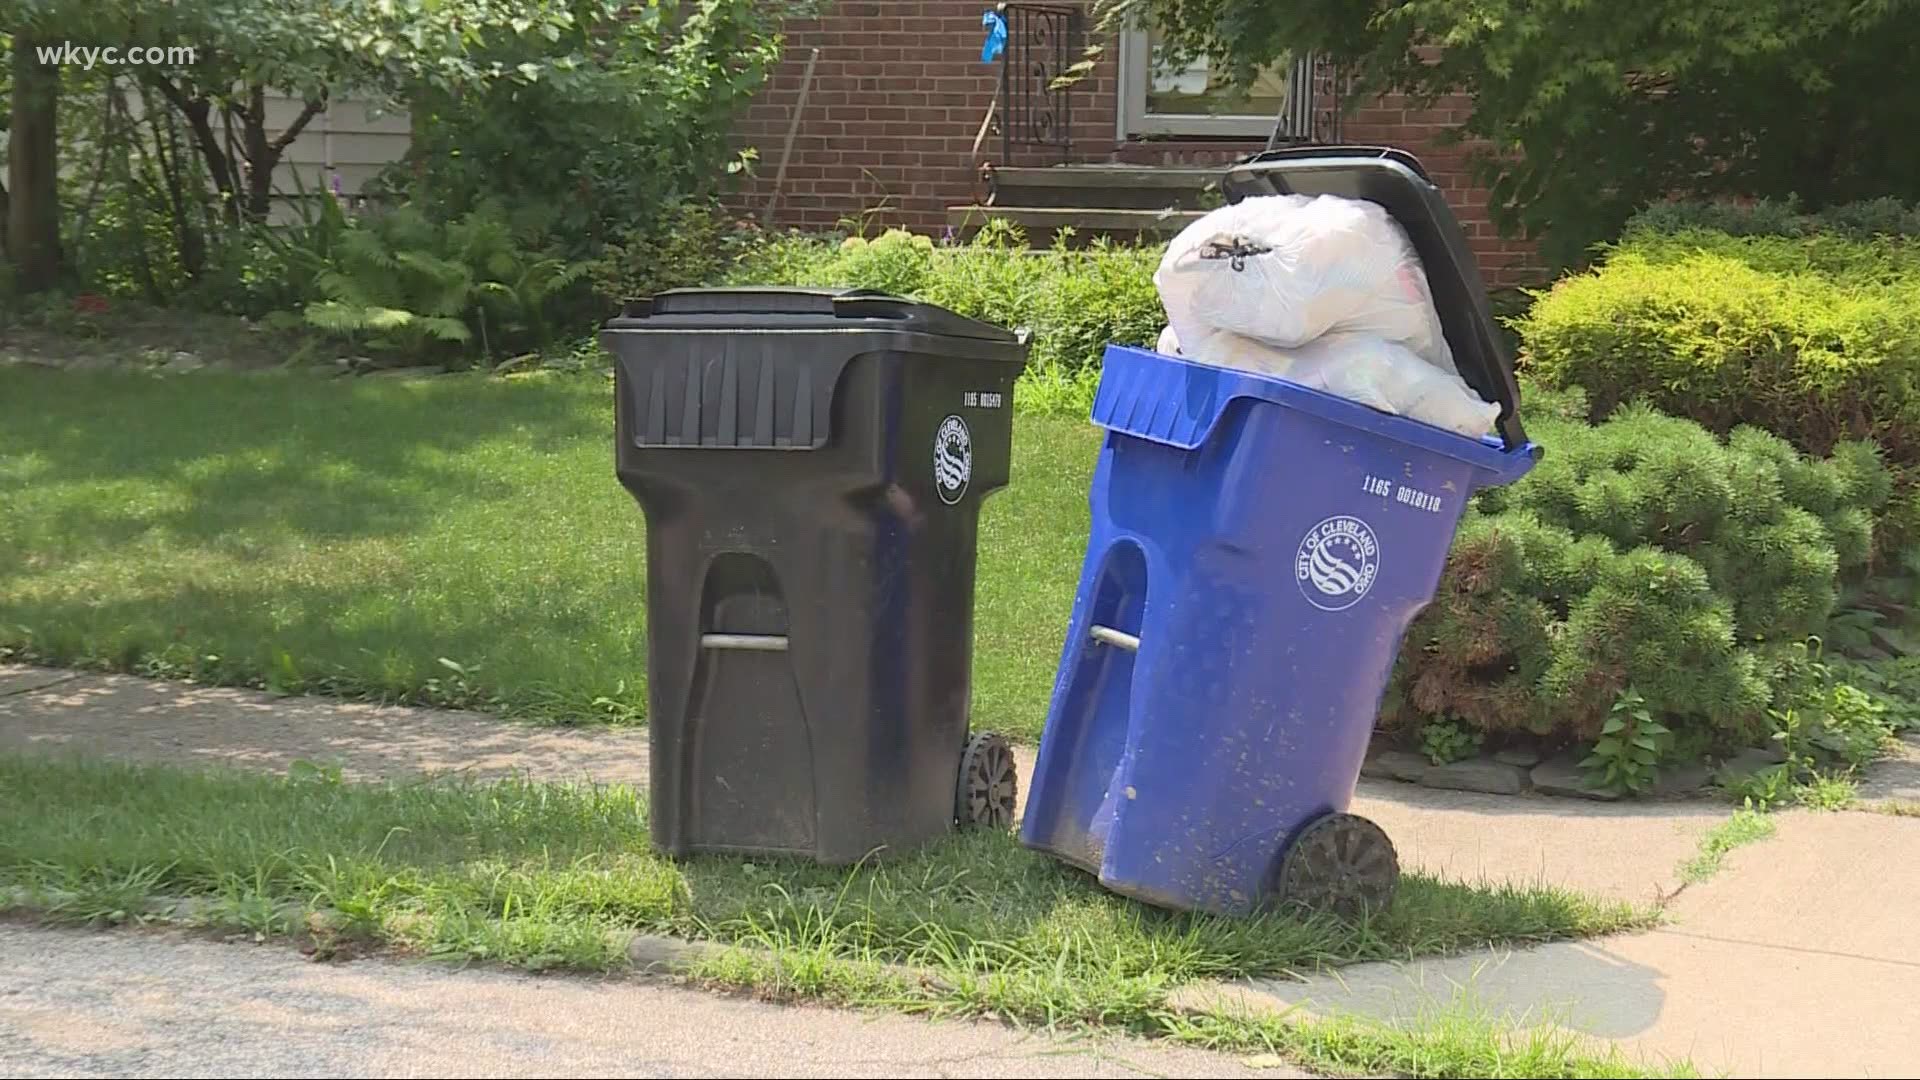 The city of Cleveland is working on a recycling plan for residents. There hasn't been one for more than a year.